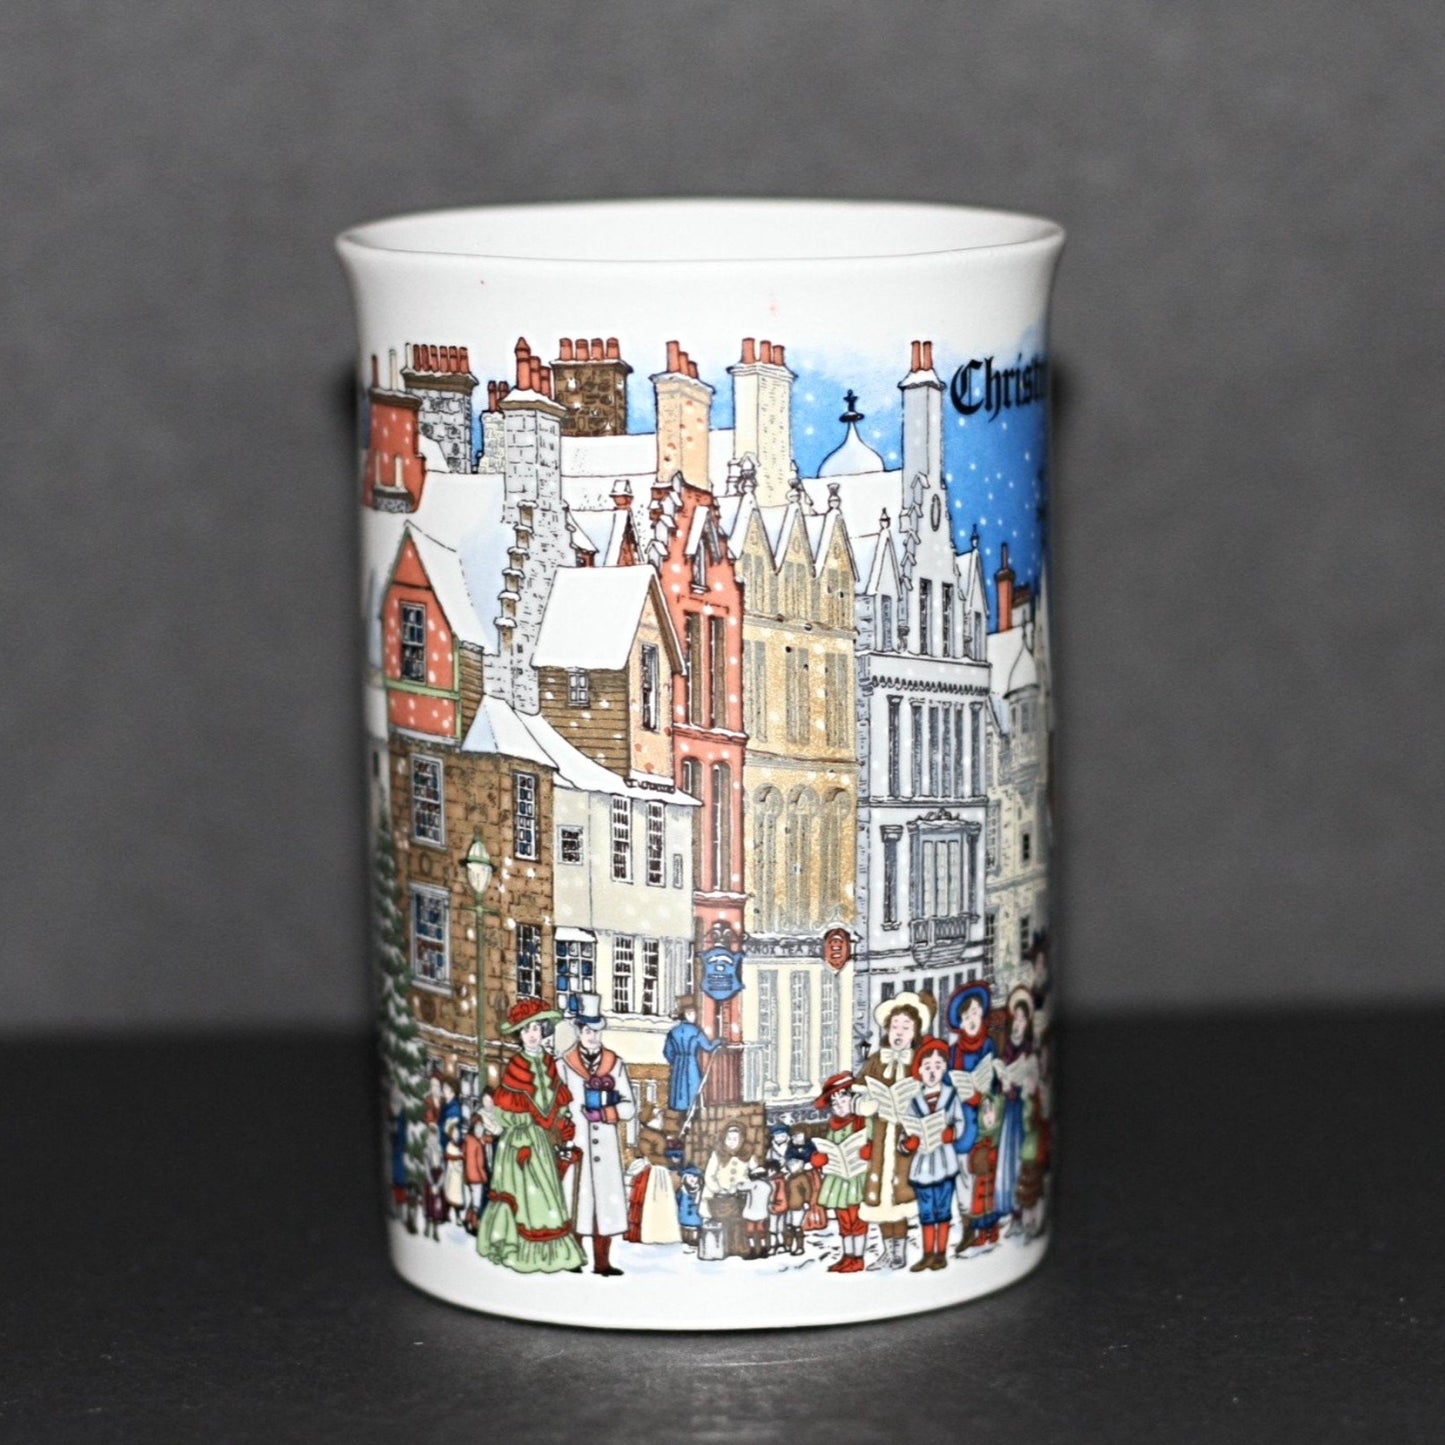 Dunoon Mug Christmas Time Carollers by Sue Scullard Commemorative 1991